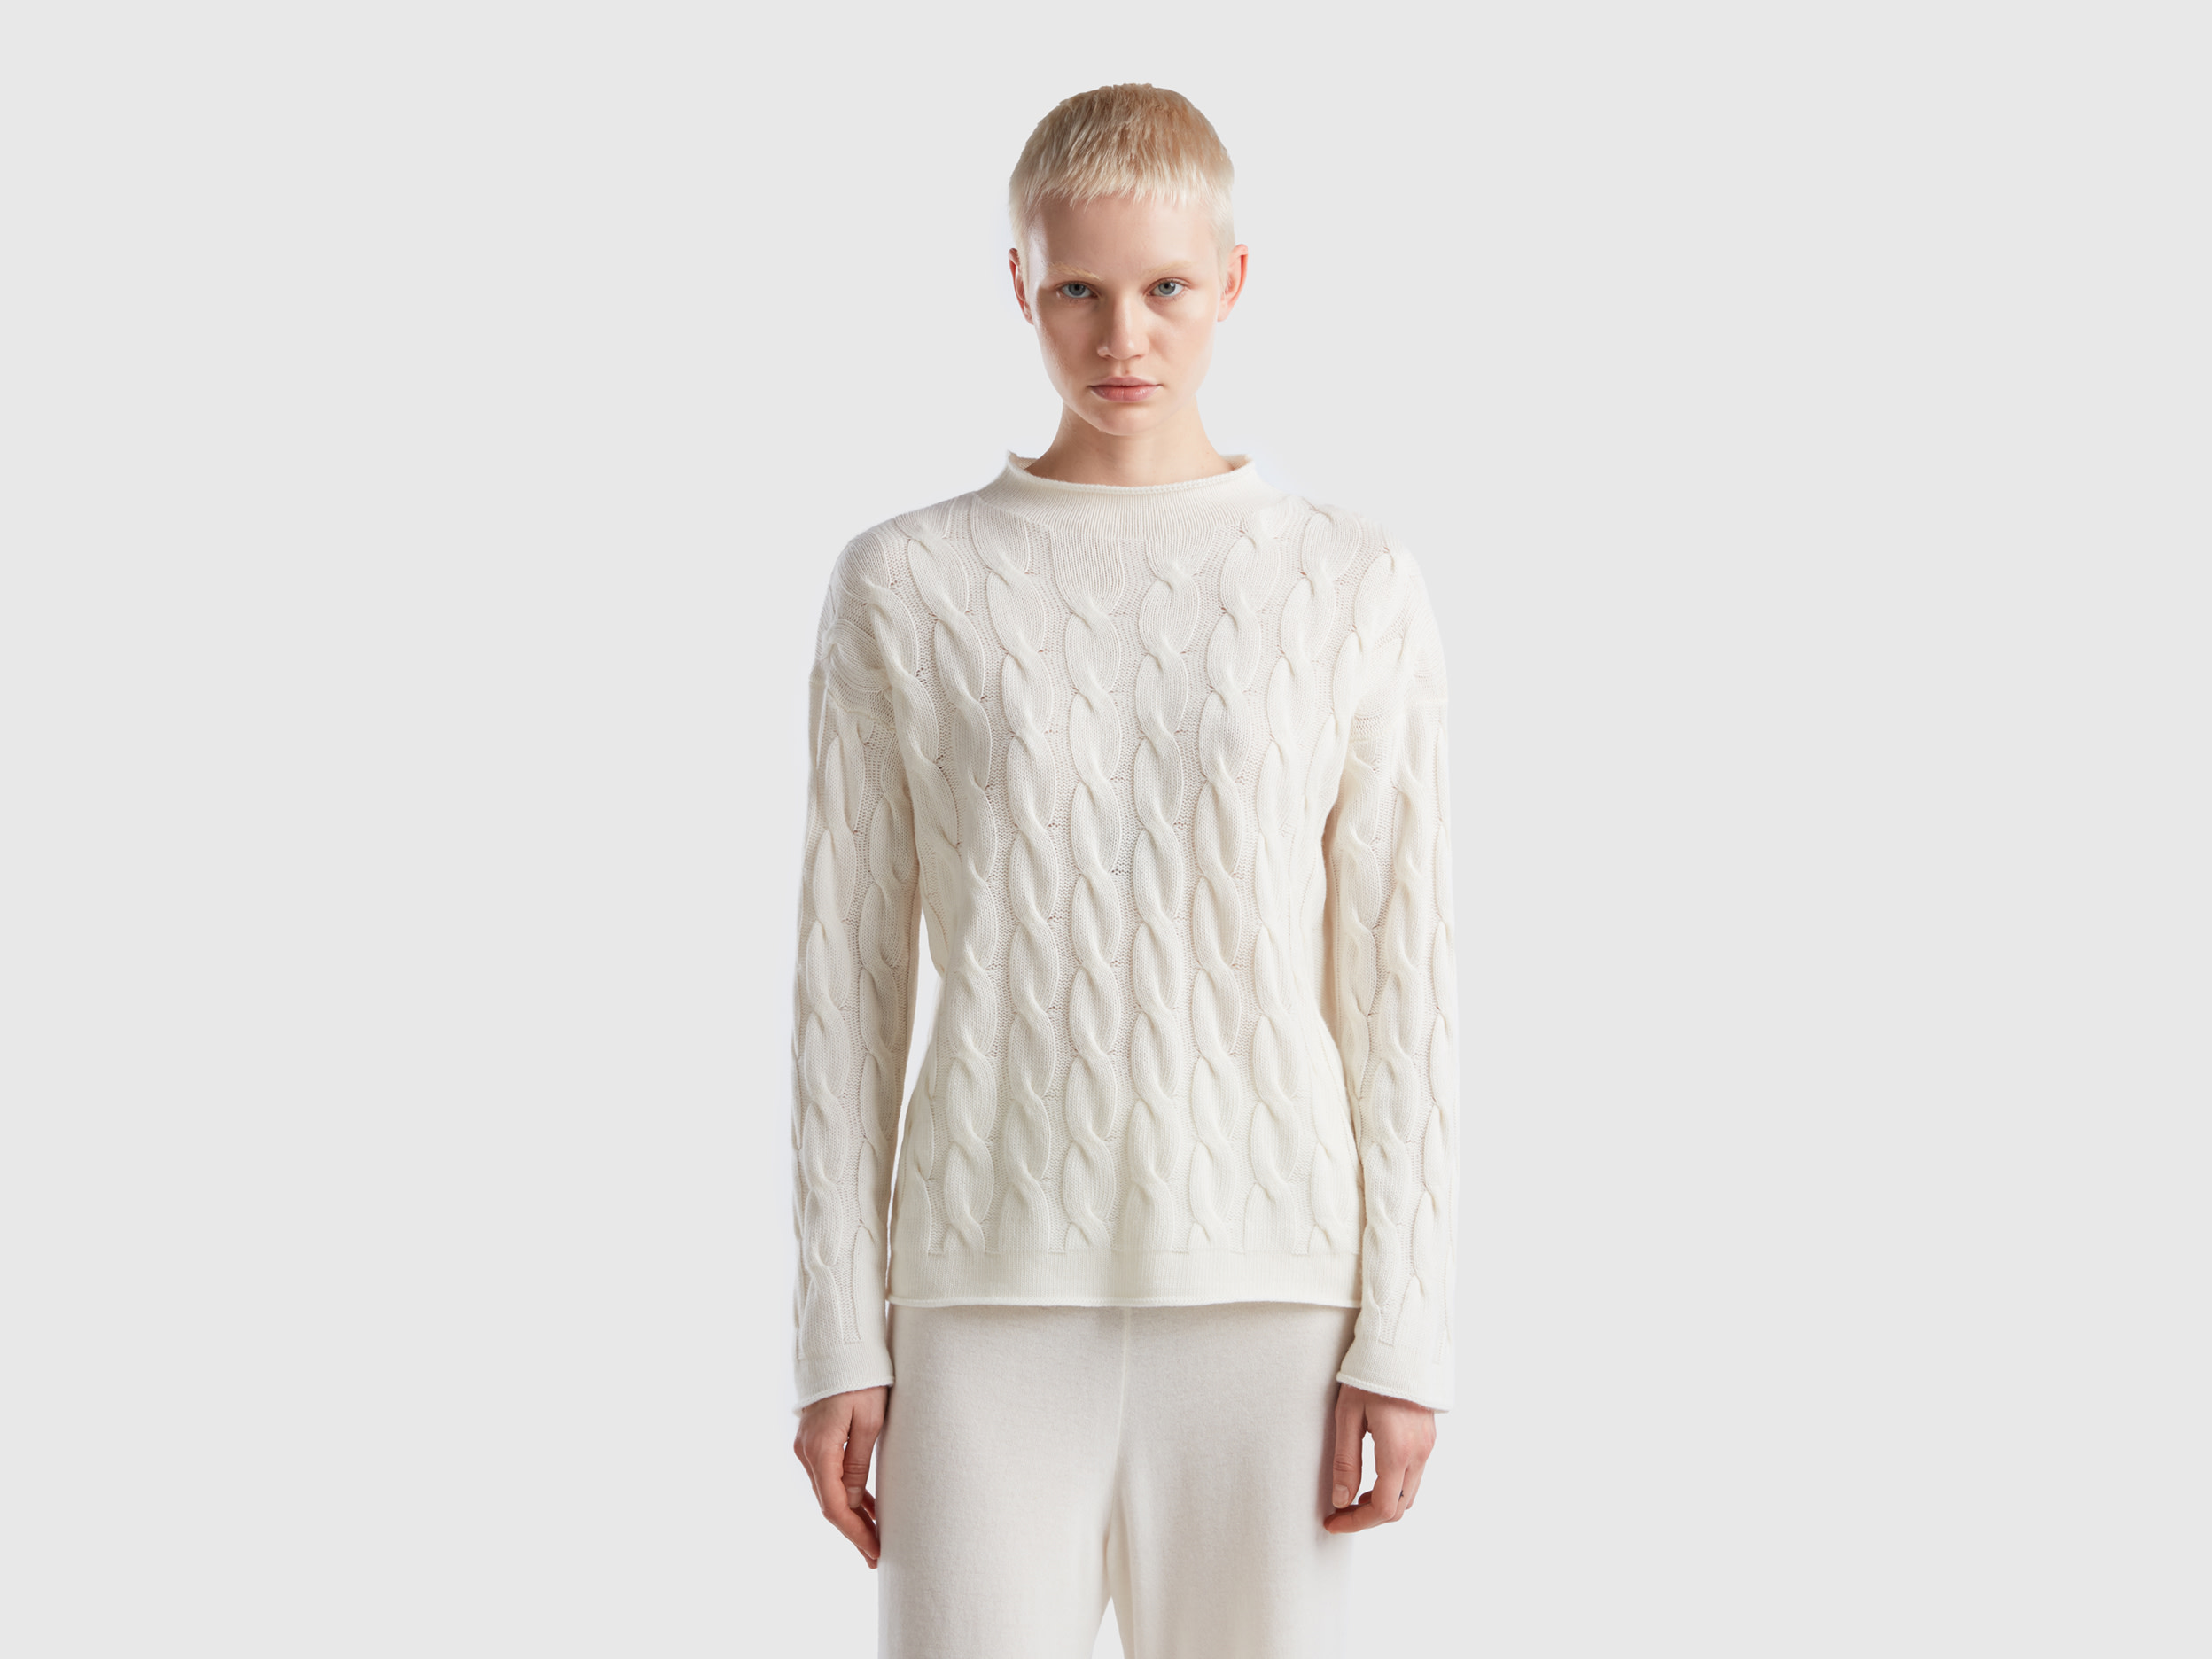 Benetton, Cable Knit Sweater, size S, Creamy White, Women